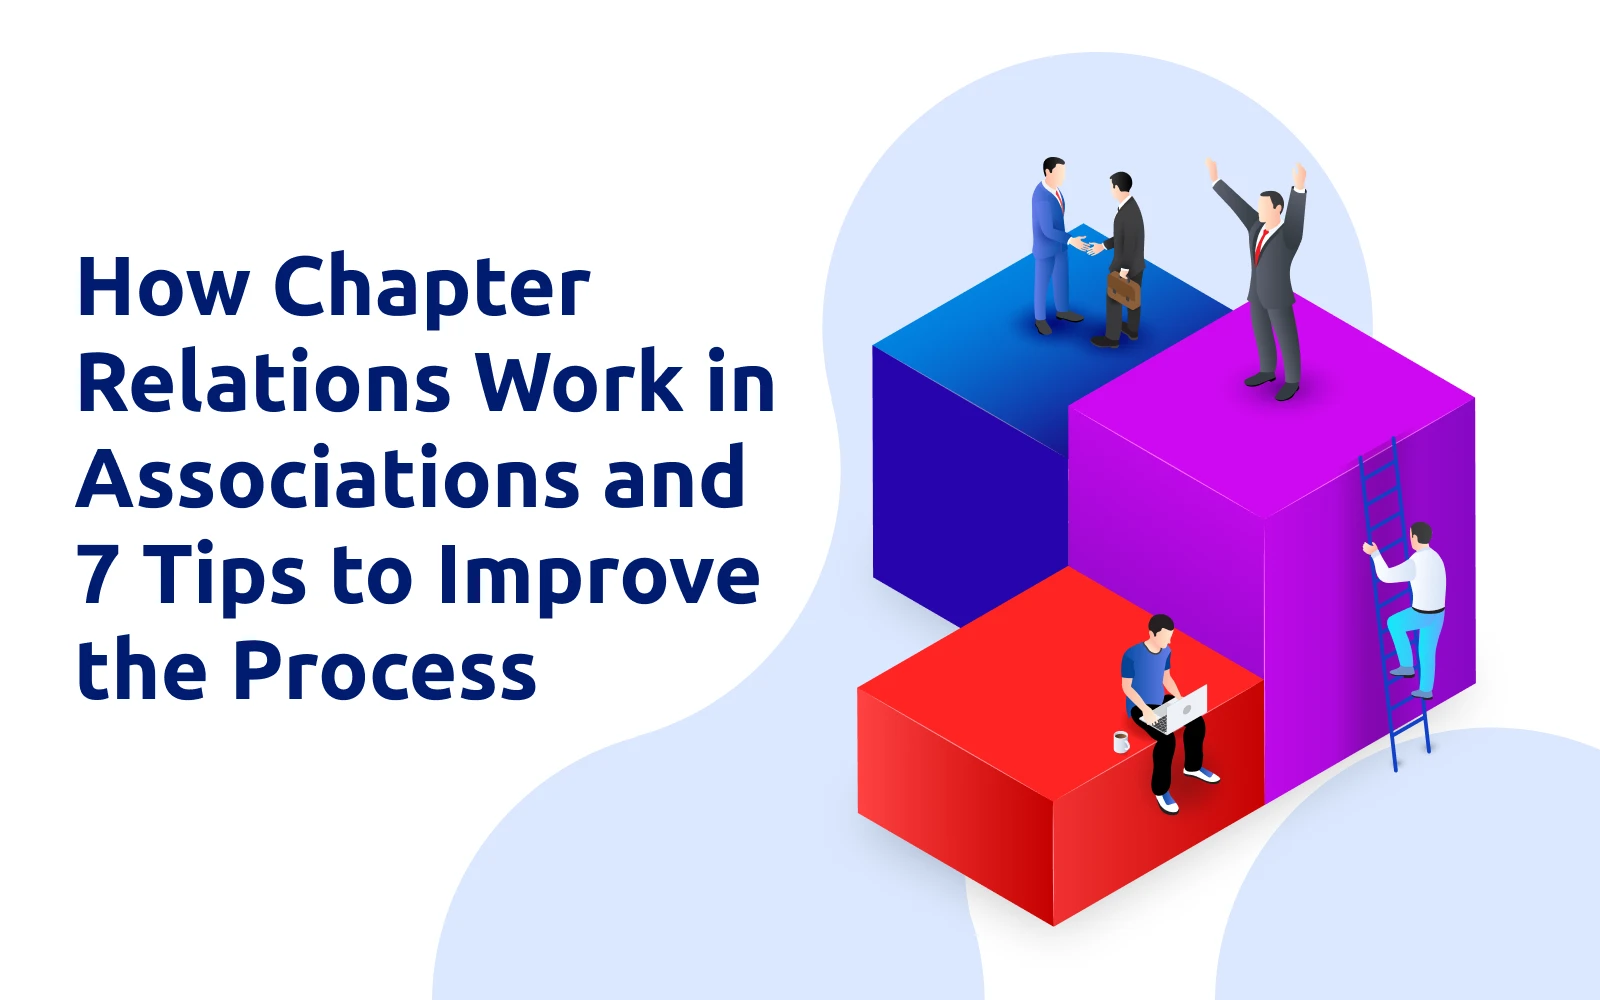 How Chapter Relations Work in Associations and 7 Tips to Improve the Process?